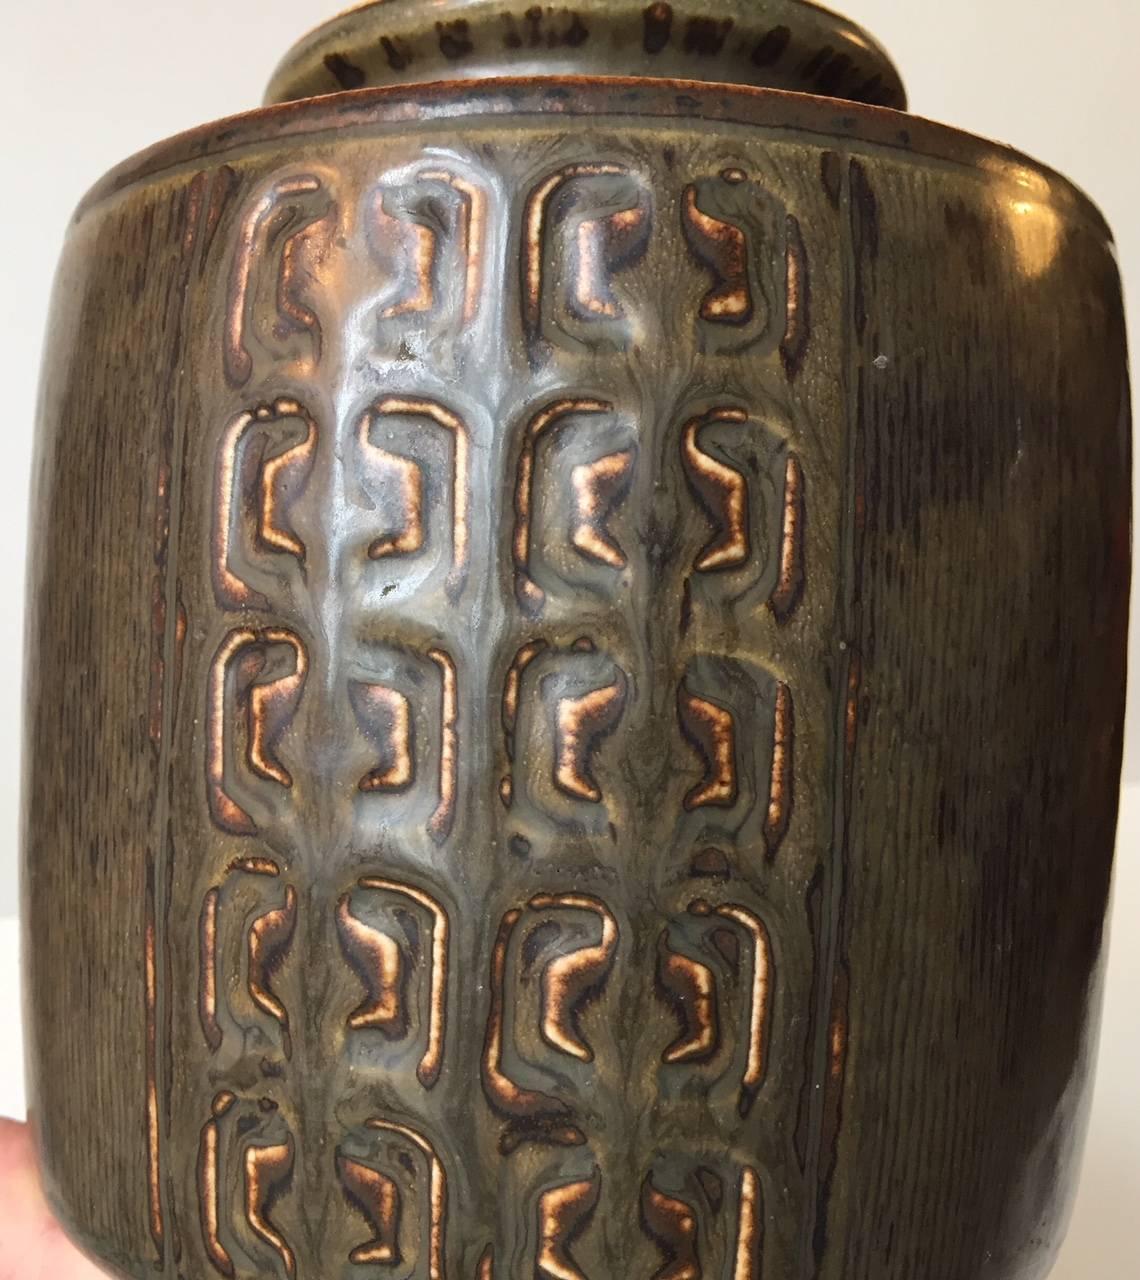 This stoneware vase was designed by the Danish ceramist Valdemar Petersen and manufactured by Bing & Grøndahl or B&G in Copenhagen, Denmark during the 1960s. This is the larger version in this line and it retains the design number: 7228. It is